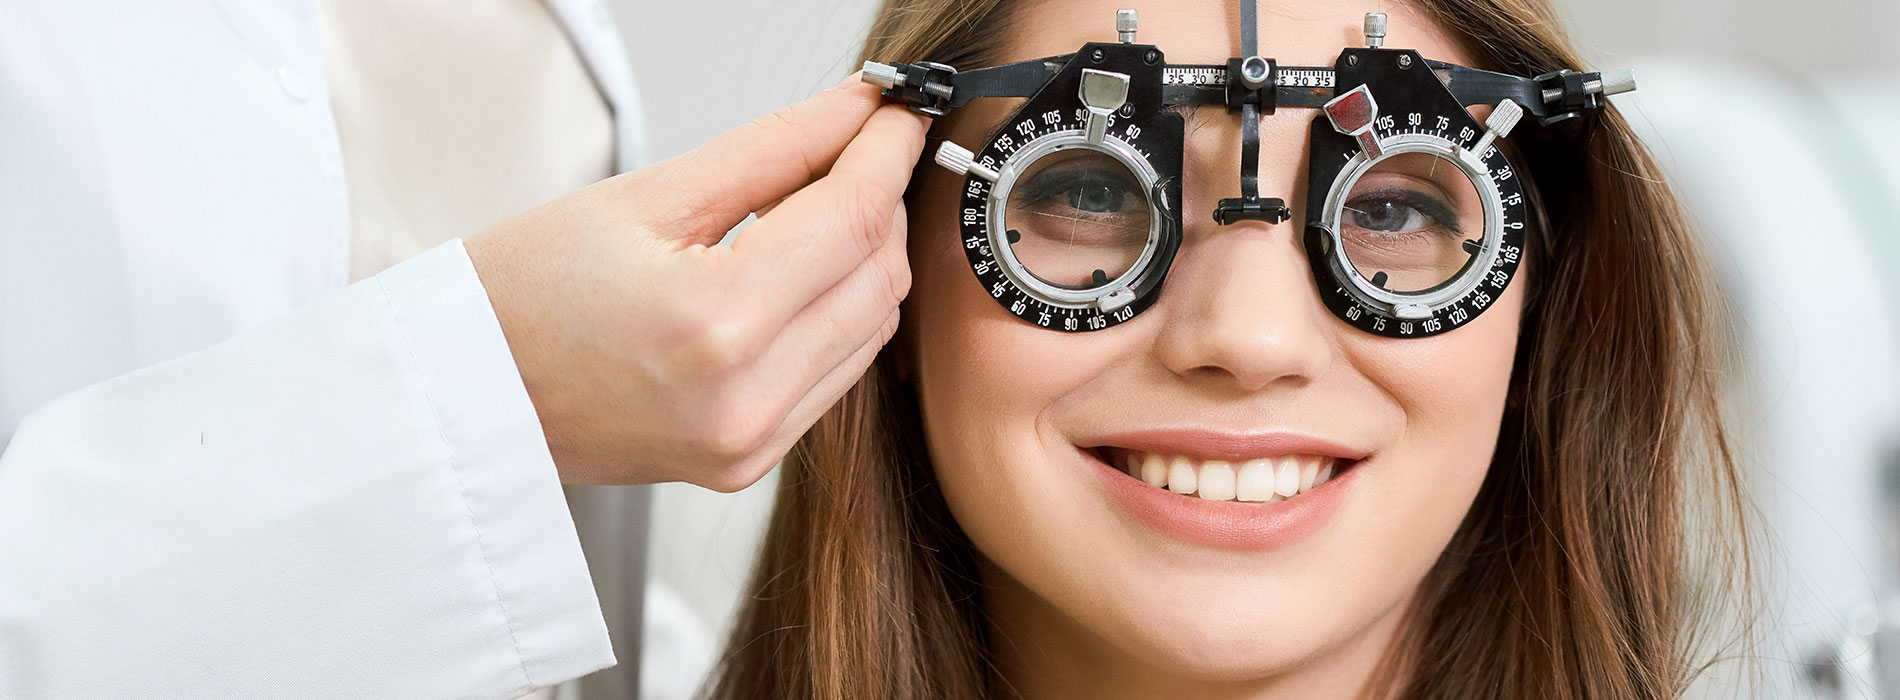 Clear Eye Care | Macular Degeneration Evaluation   Treatment, Cataract Diagnosis   Management and Contact Lens Exams   Fittings